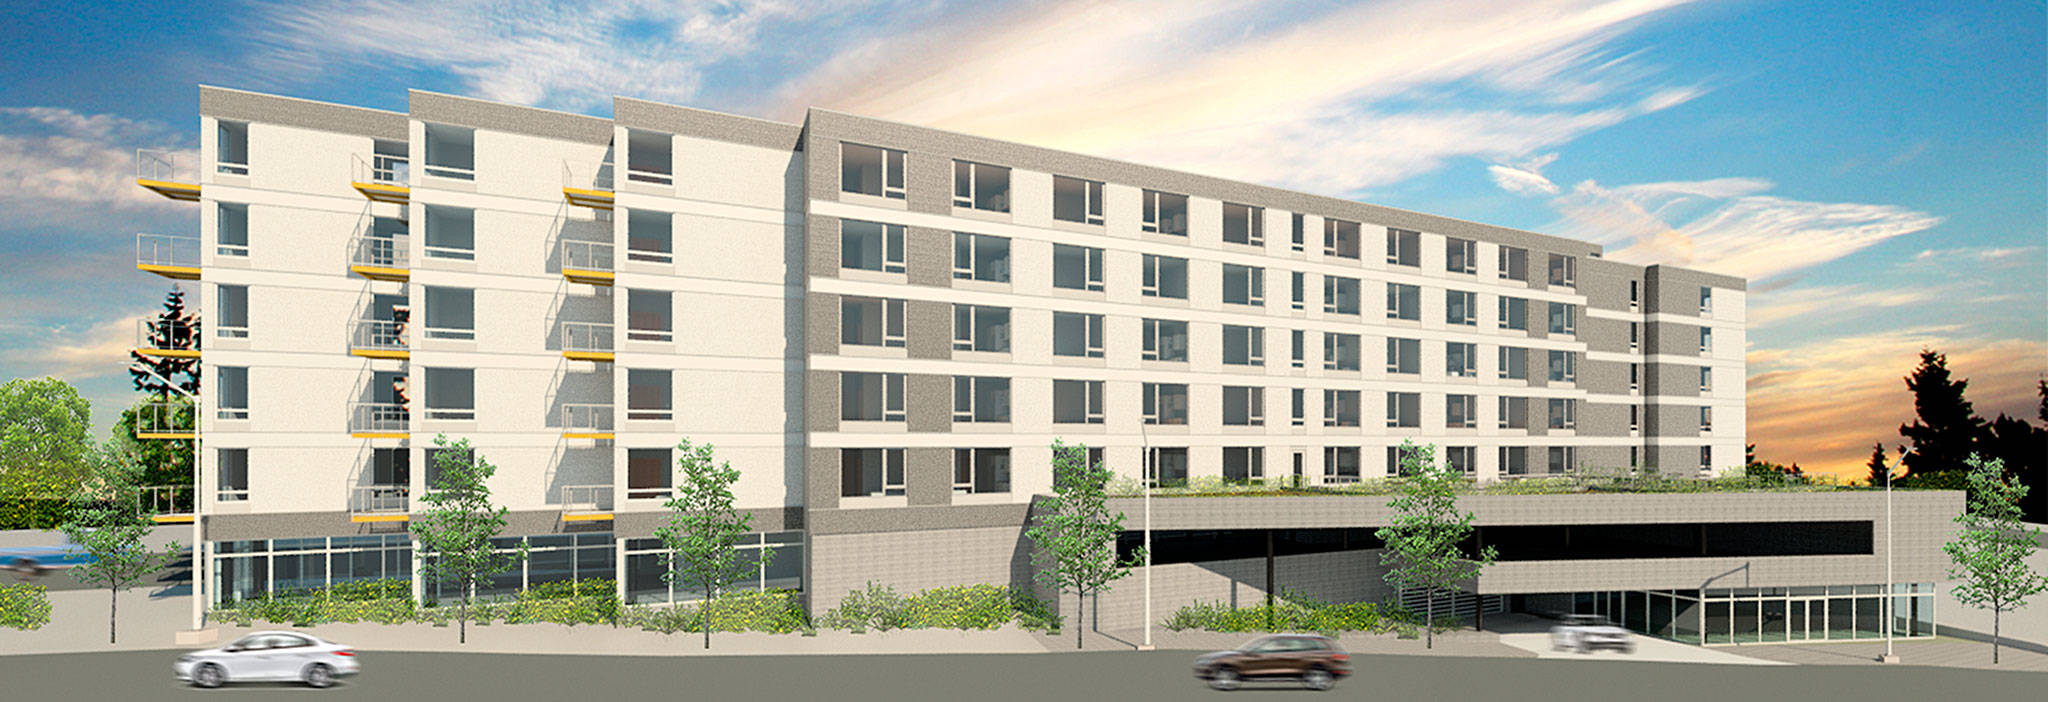 A proposed 140-unit student housing complex in Everett could add another big building to north Broadway.